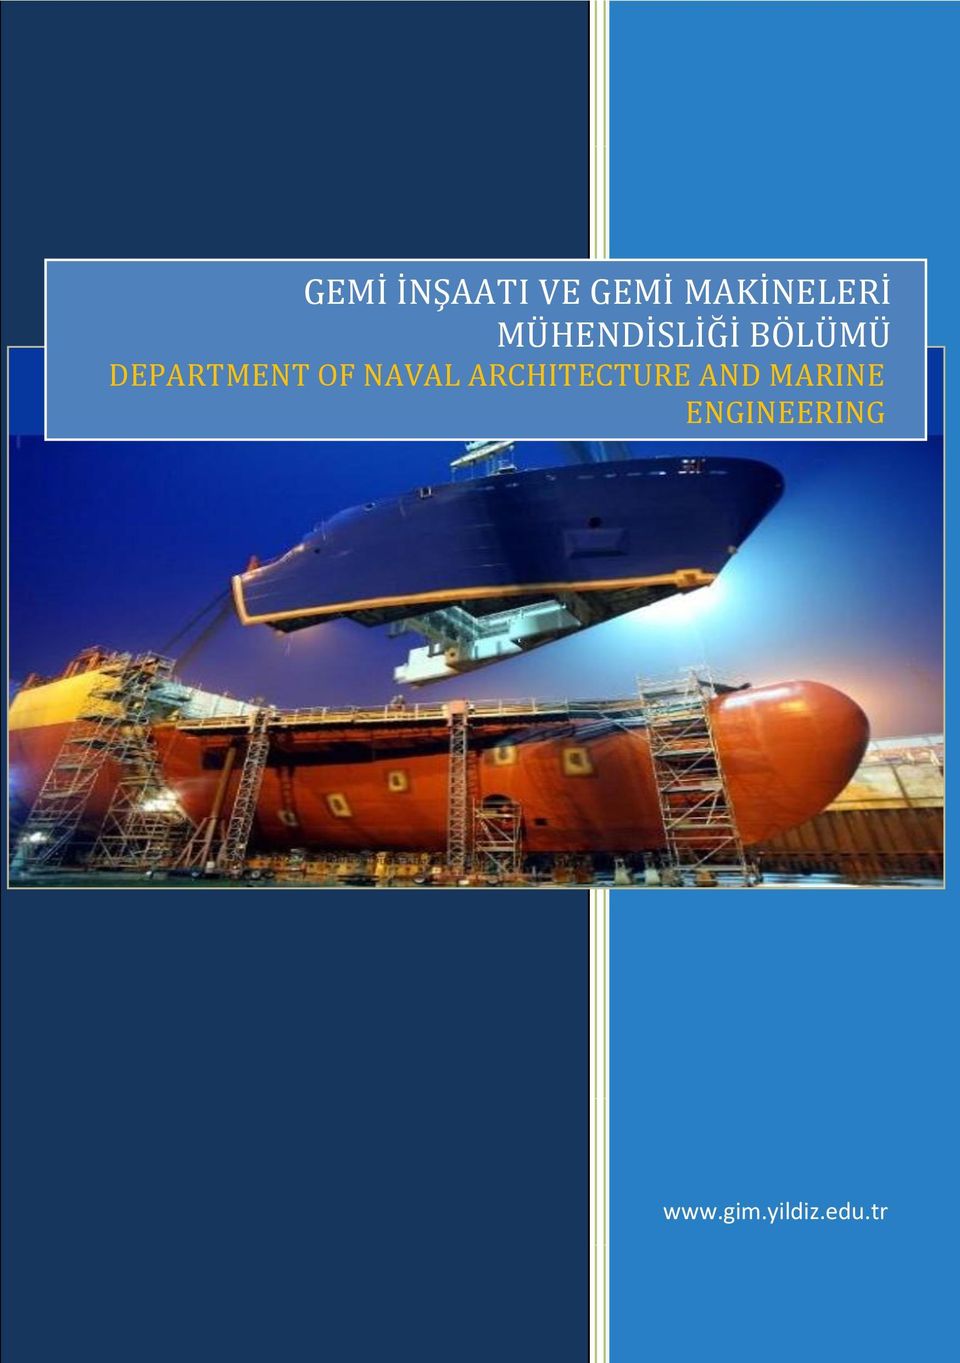 OF NAVAL ARCHITECTURE AND MARINE